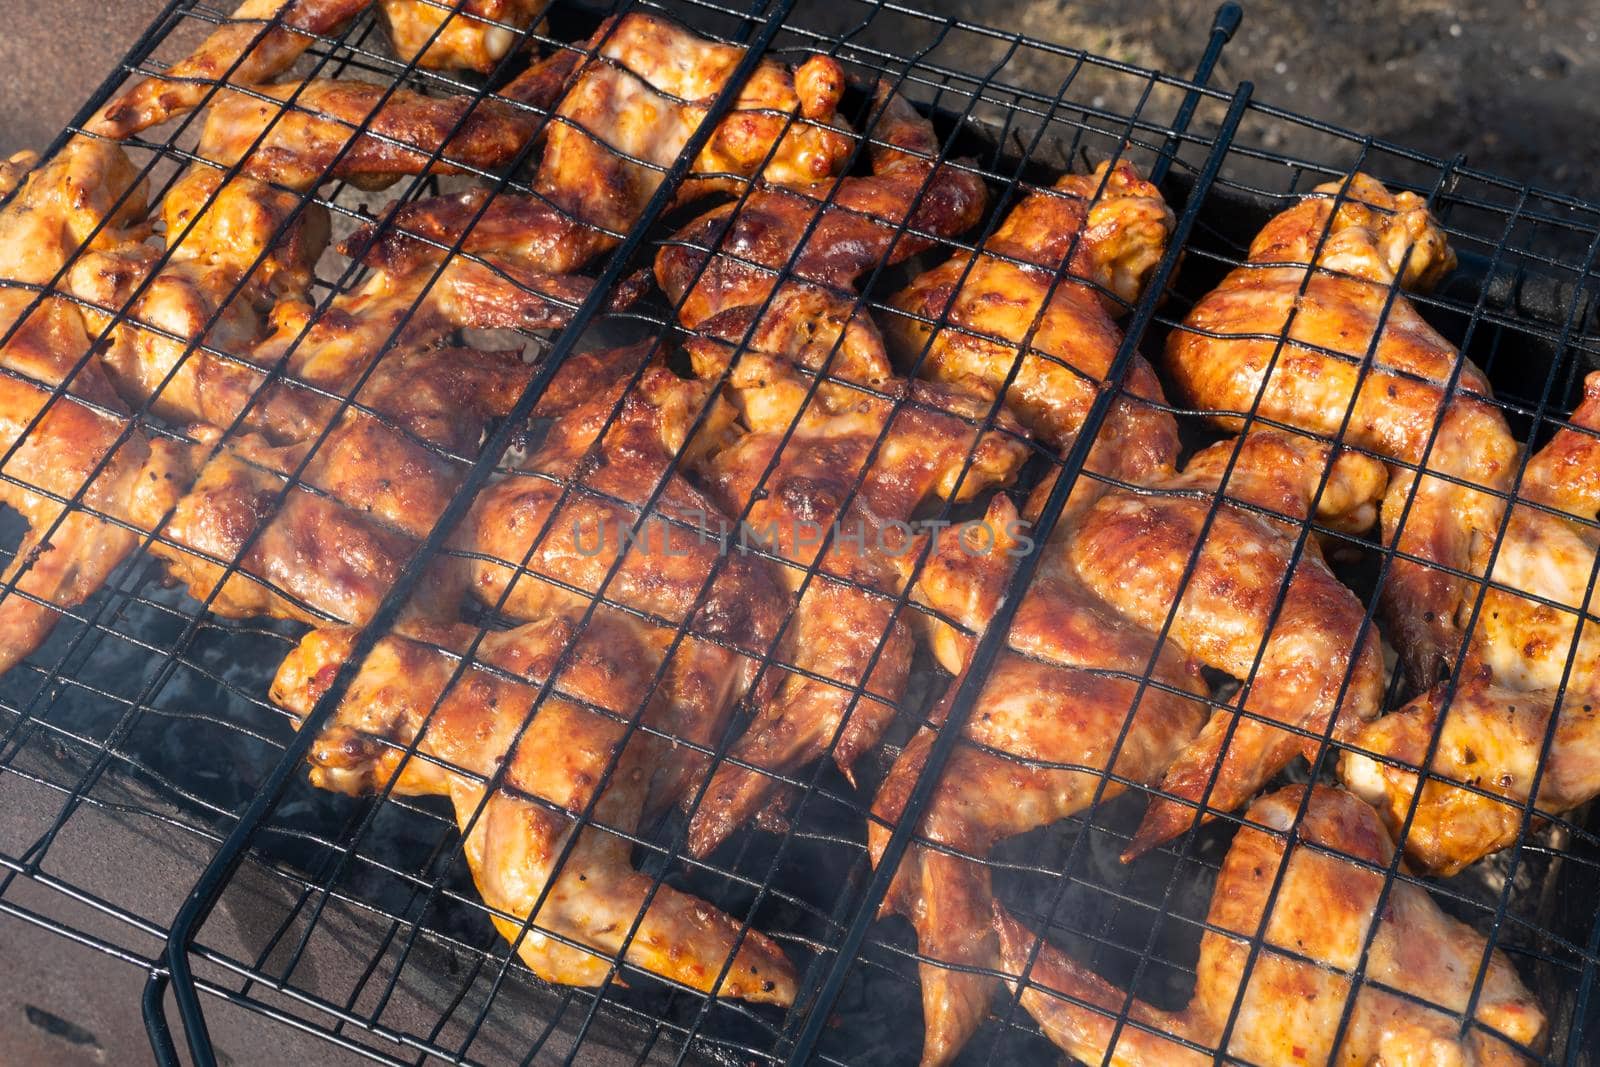 Grilled chicken wings.video 4K cooking fry shish kebab,BBQ, barbecue, shashlik or meat on coals. Cooking meat in the grill on skewers in nature in the summer on a picnic. Pork on the grill